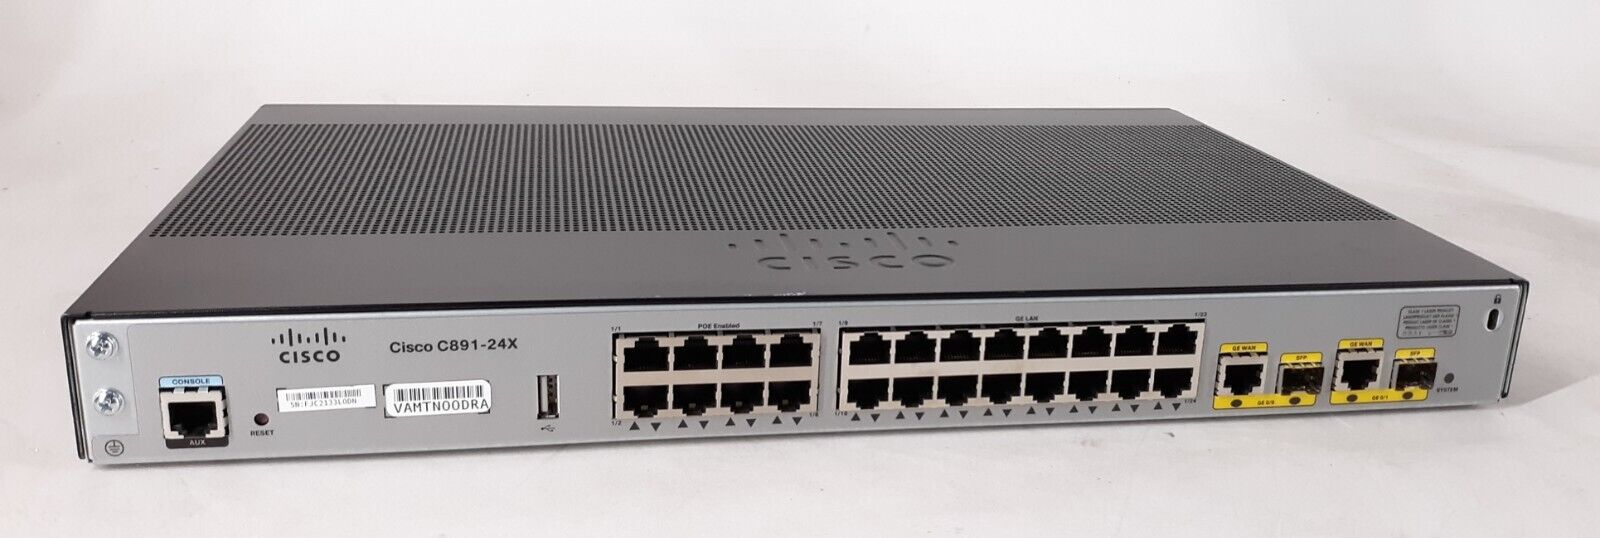 Cisco 890 Series C891-24X/K9 V01 Integrated Services Router NO Cord *AS IS*